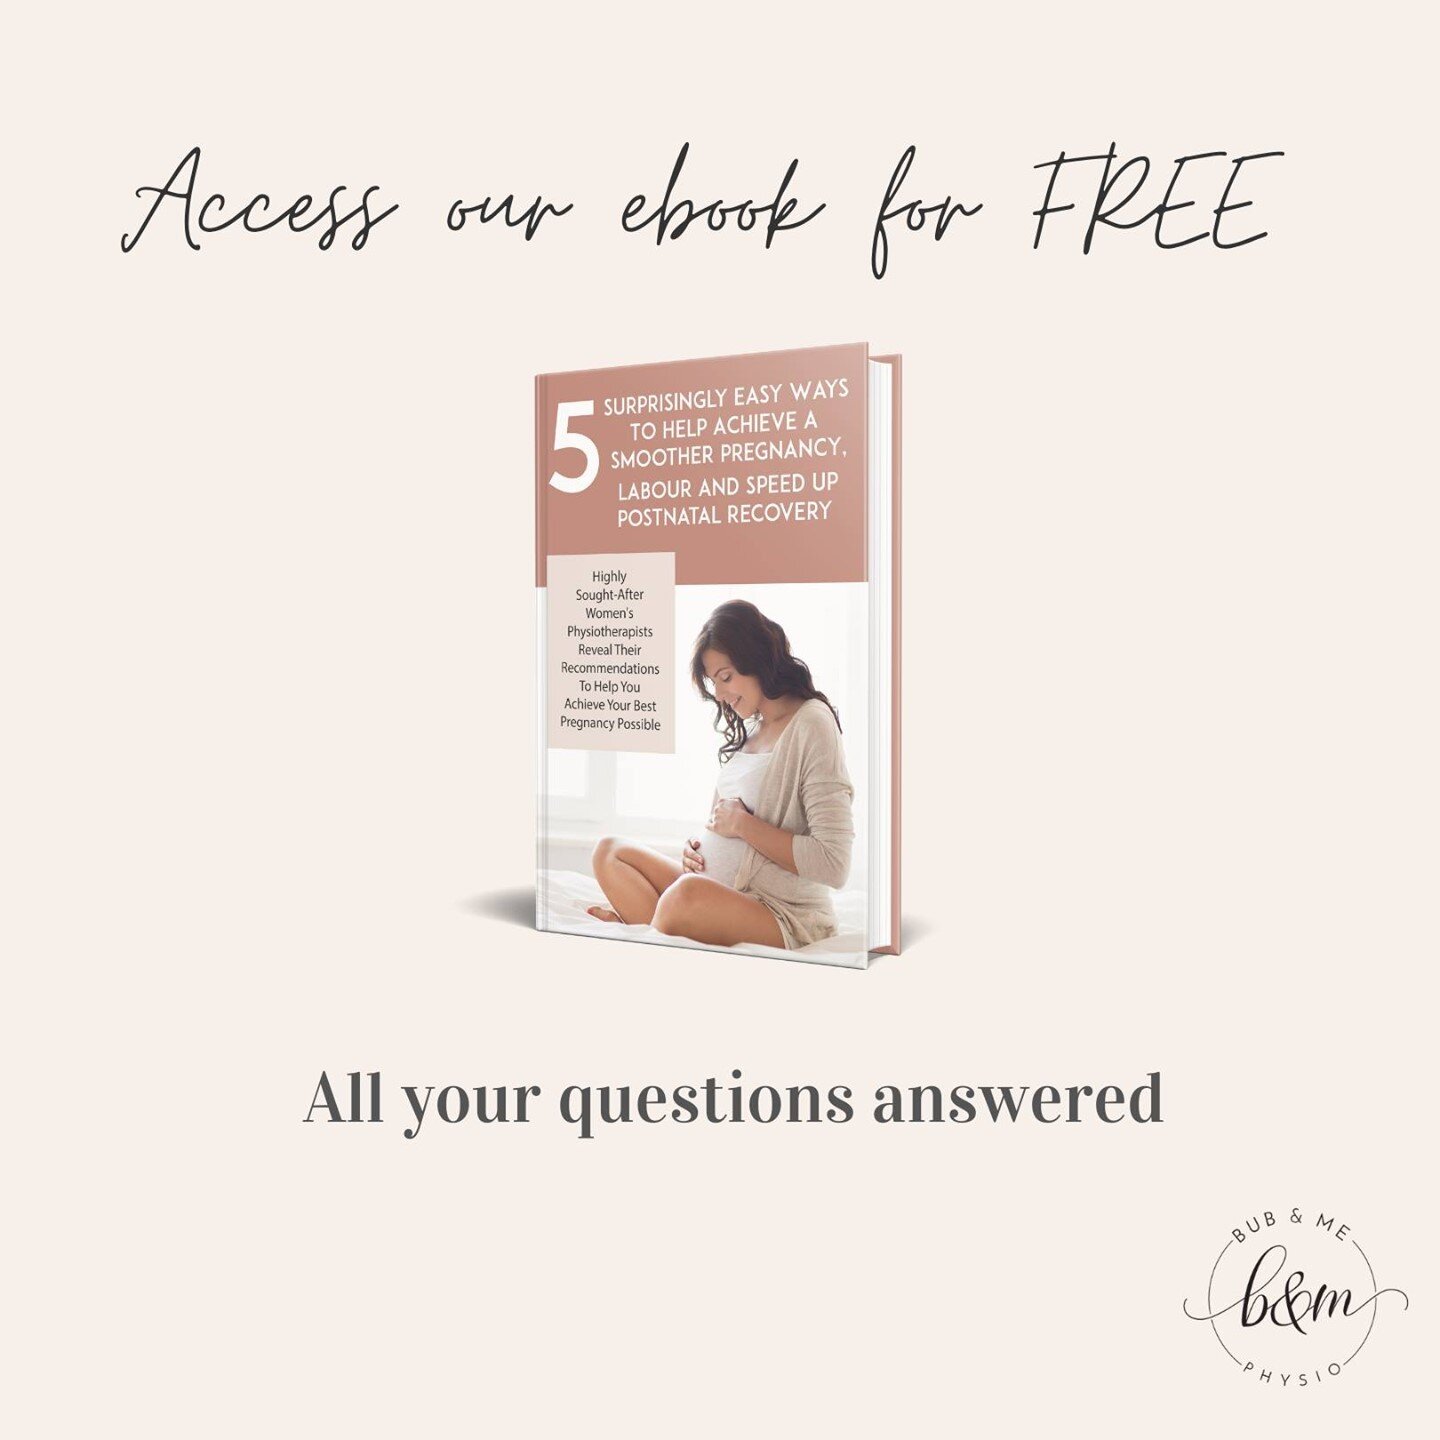 Are you ready to learn about our top 5 tips to achieve a smoother pregnancy and speed up postnatal recover? We put it into a FREE ebook for you! Access it here https://buff.ly/39TchAU